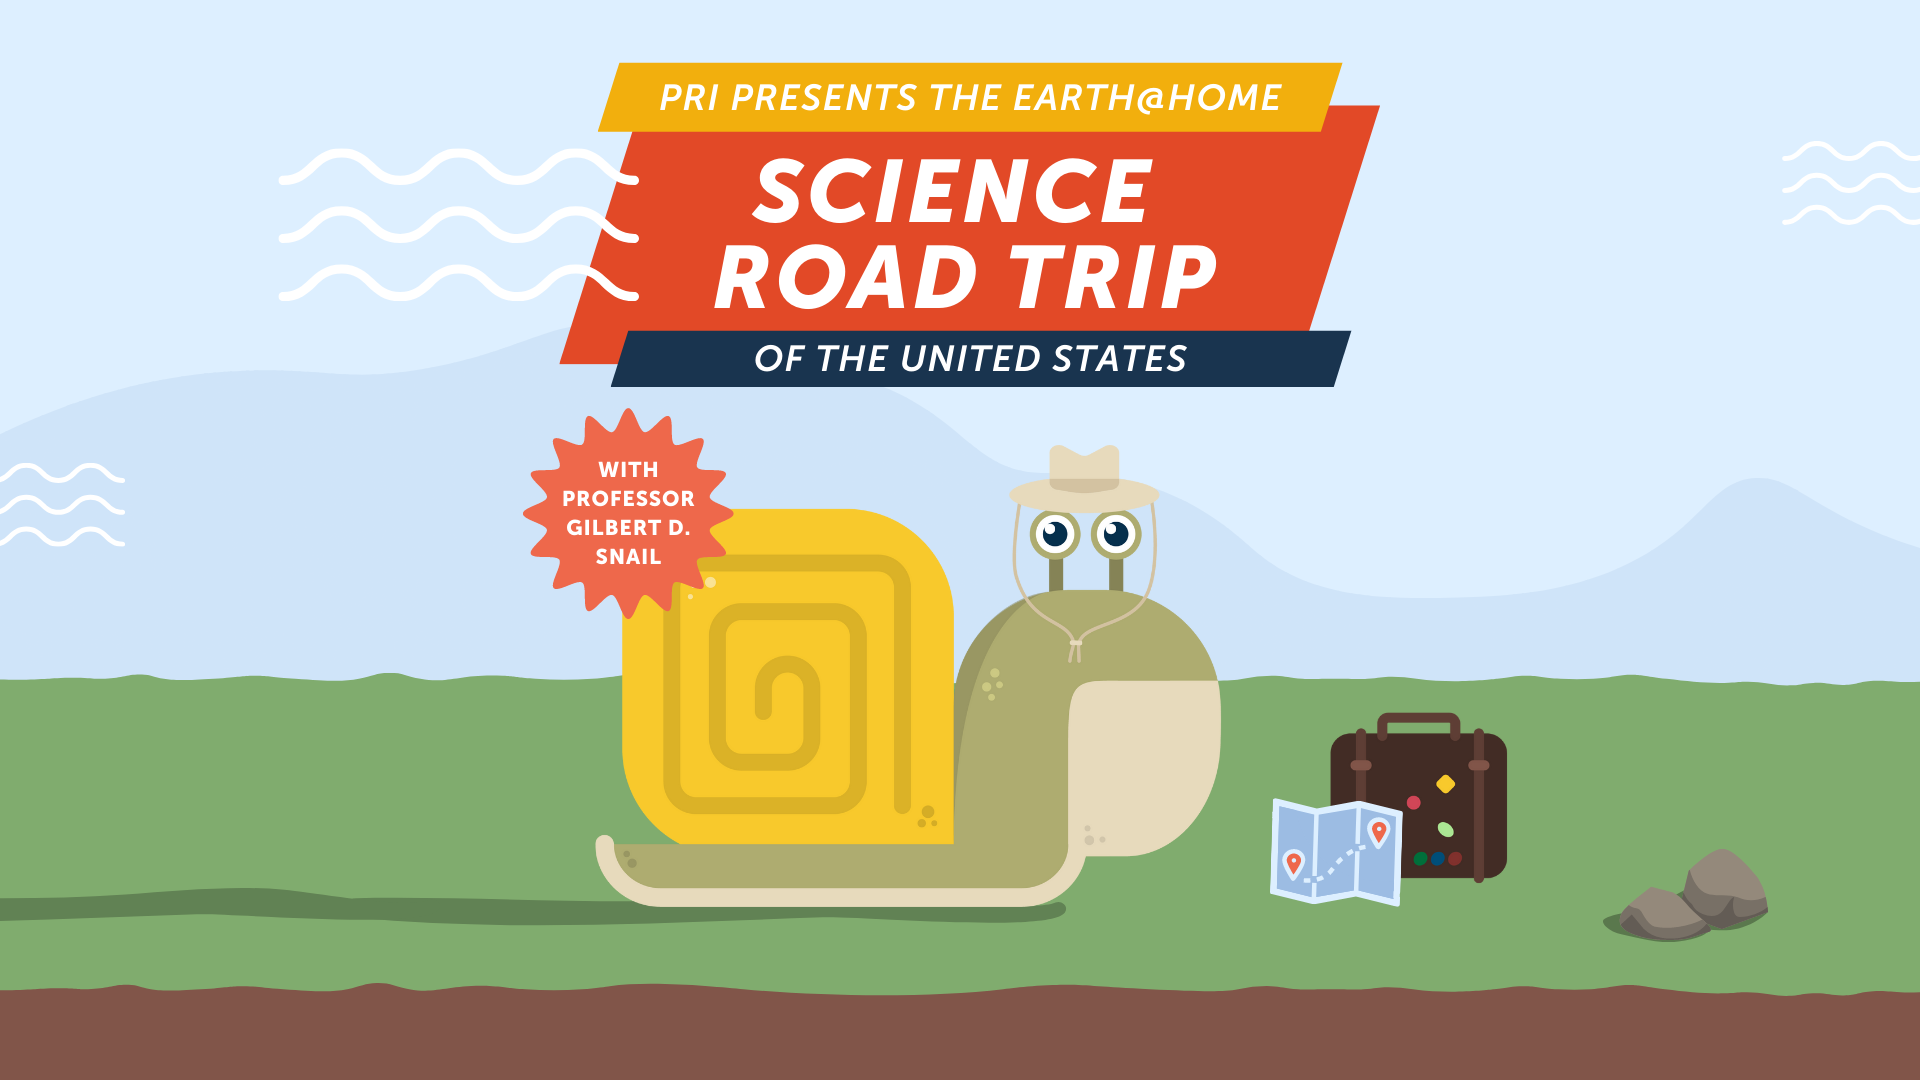 Image showing a cartoon snail and a banner that announces the Earth@Home Science Roadtrip